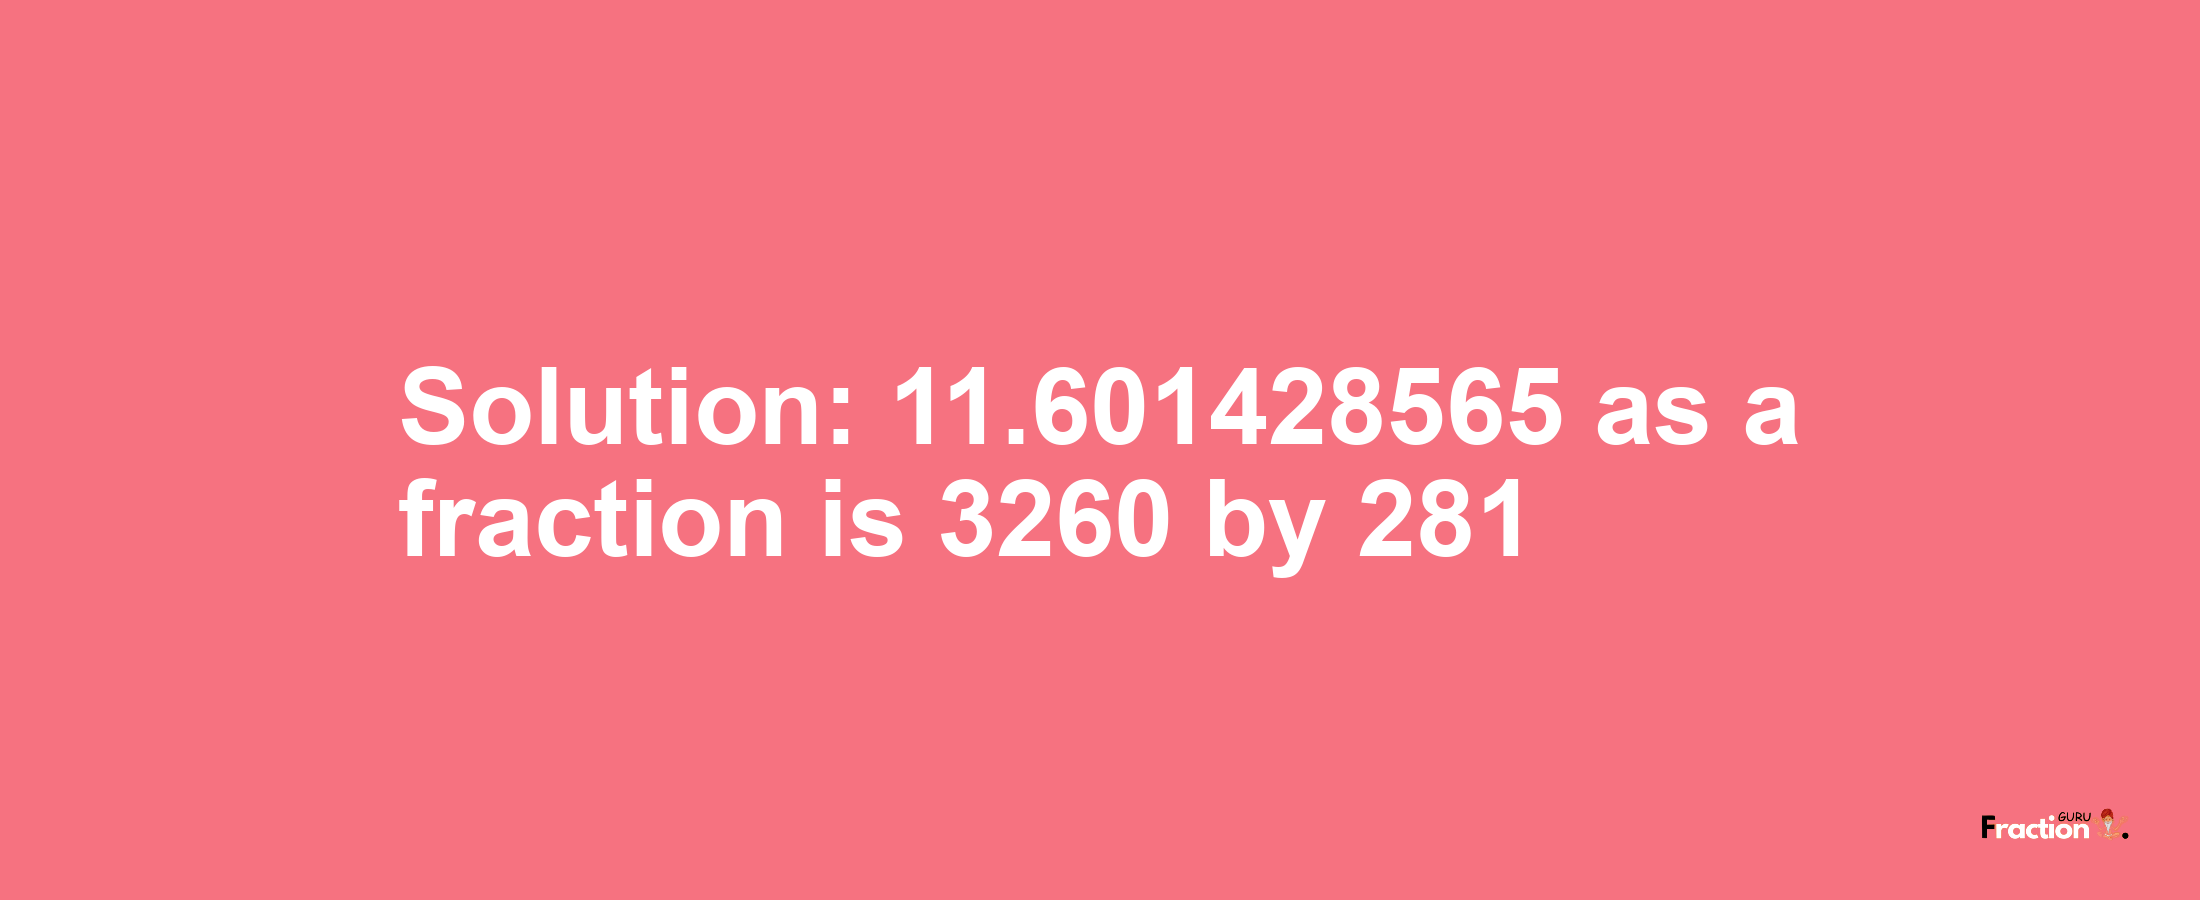 Solution:11.601428565 as a fraction is 3260/281